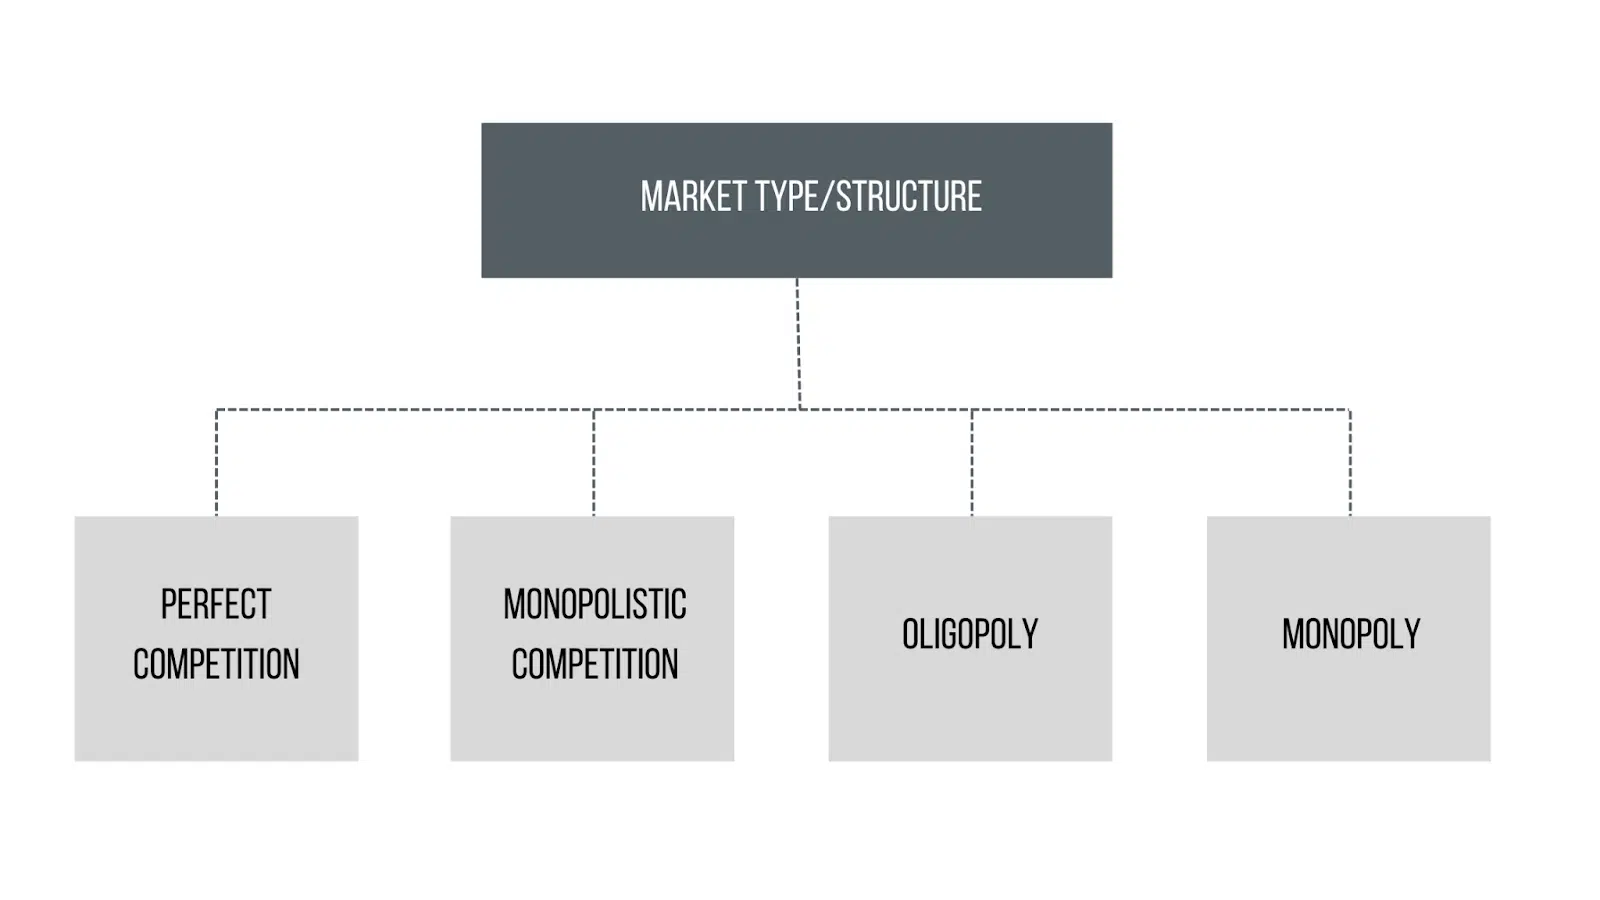 Market type or structure